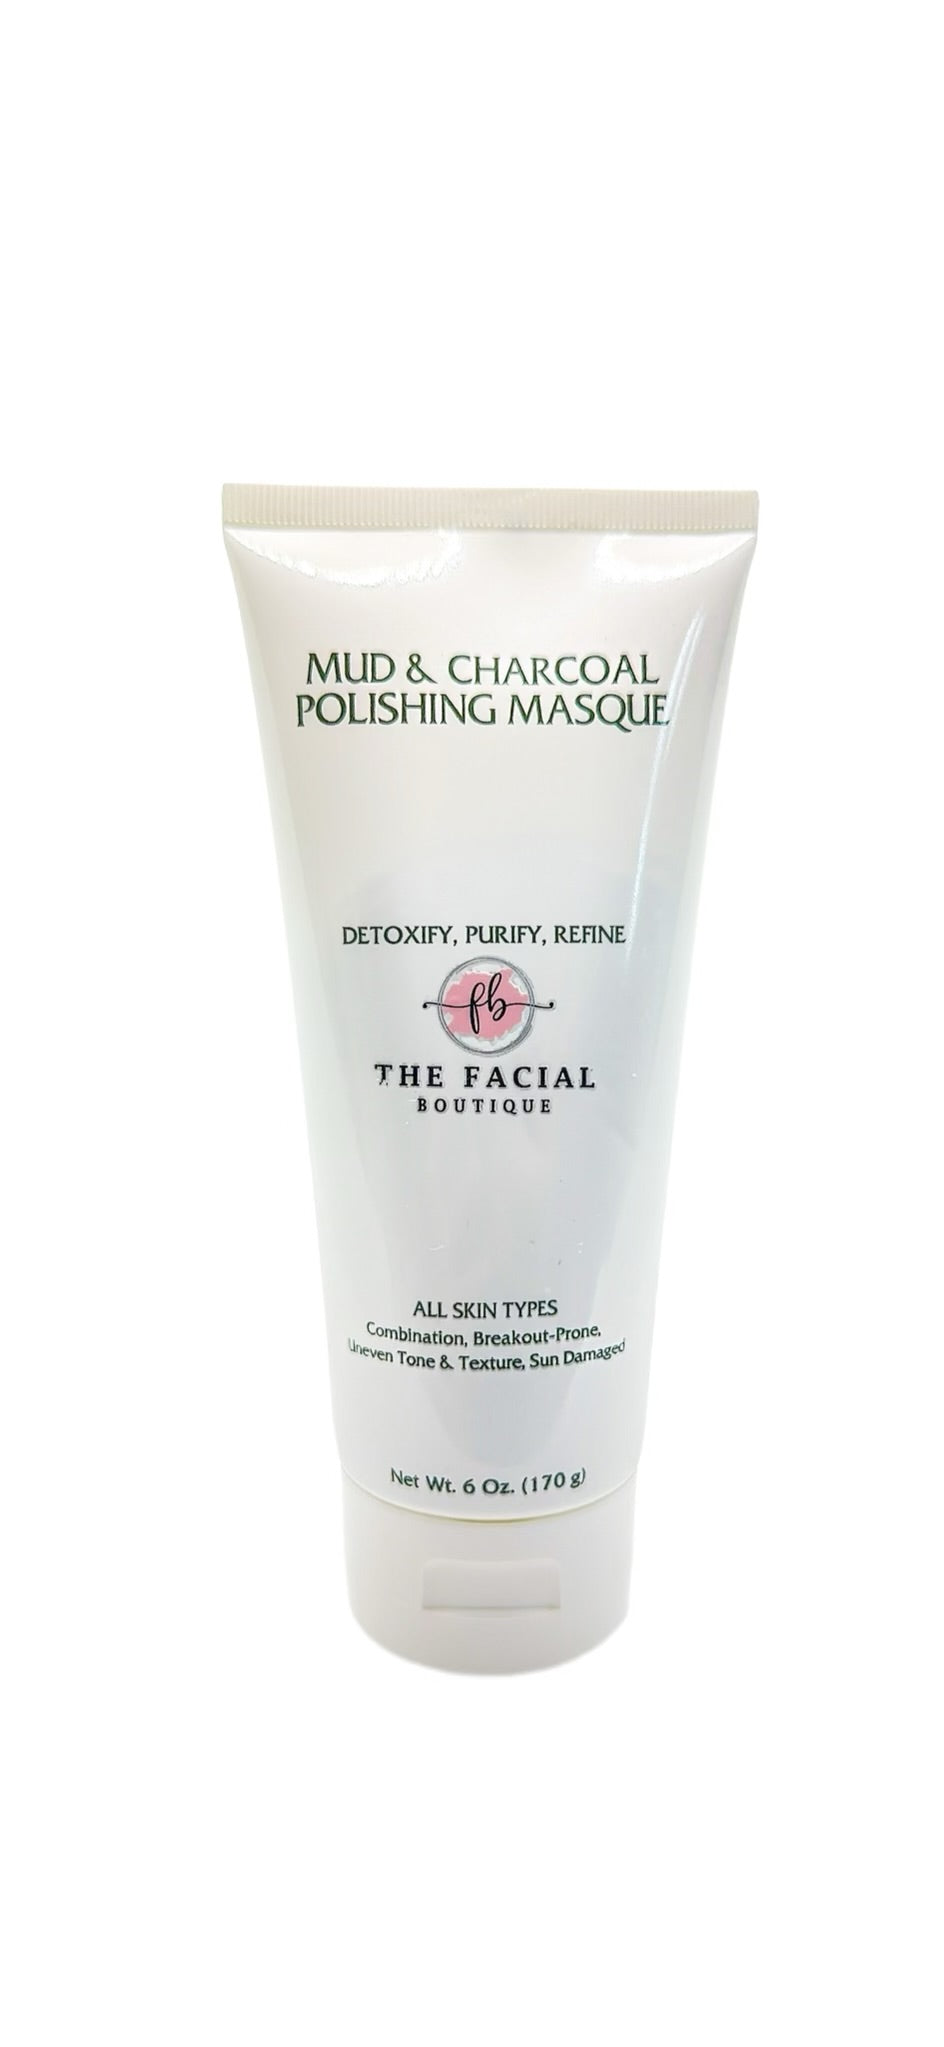 Reveal Your Skin's Natural Glow with The Facial Boutique’s Mud & Charcoal Polishing Masque at Beauty Room Destin